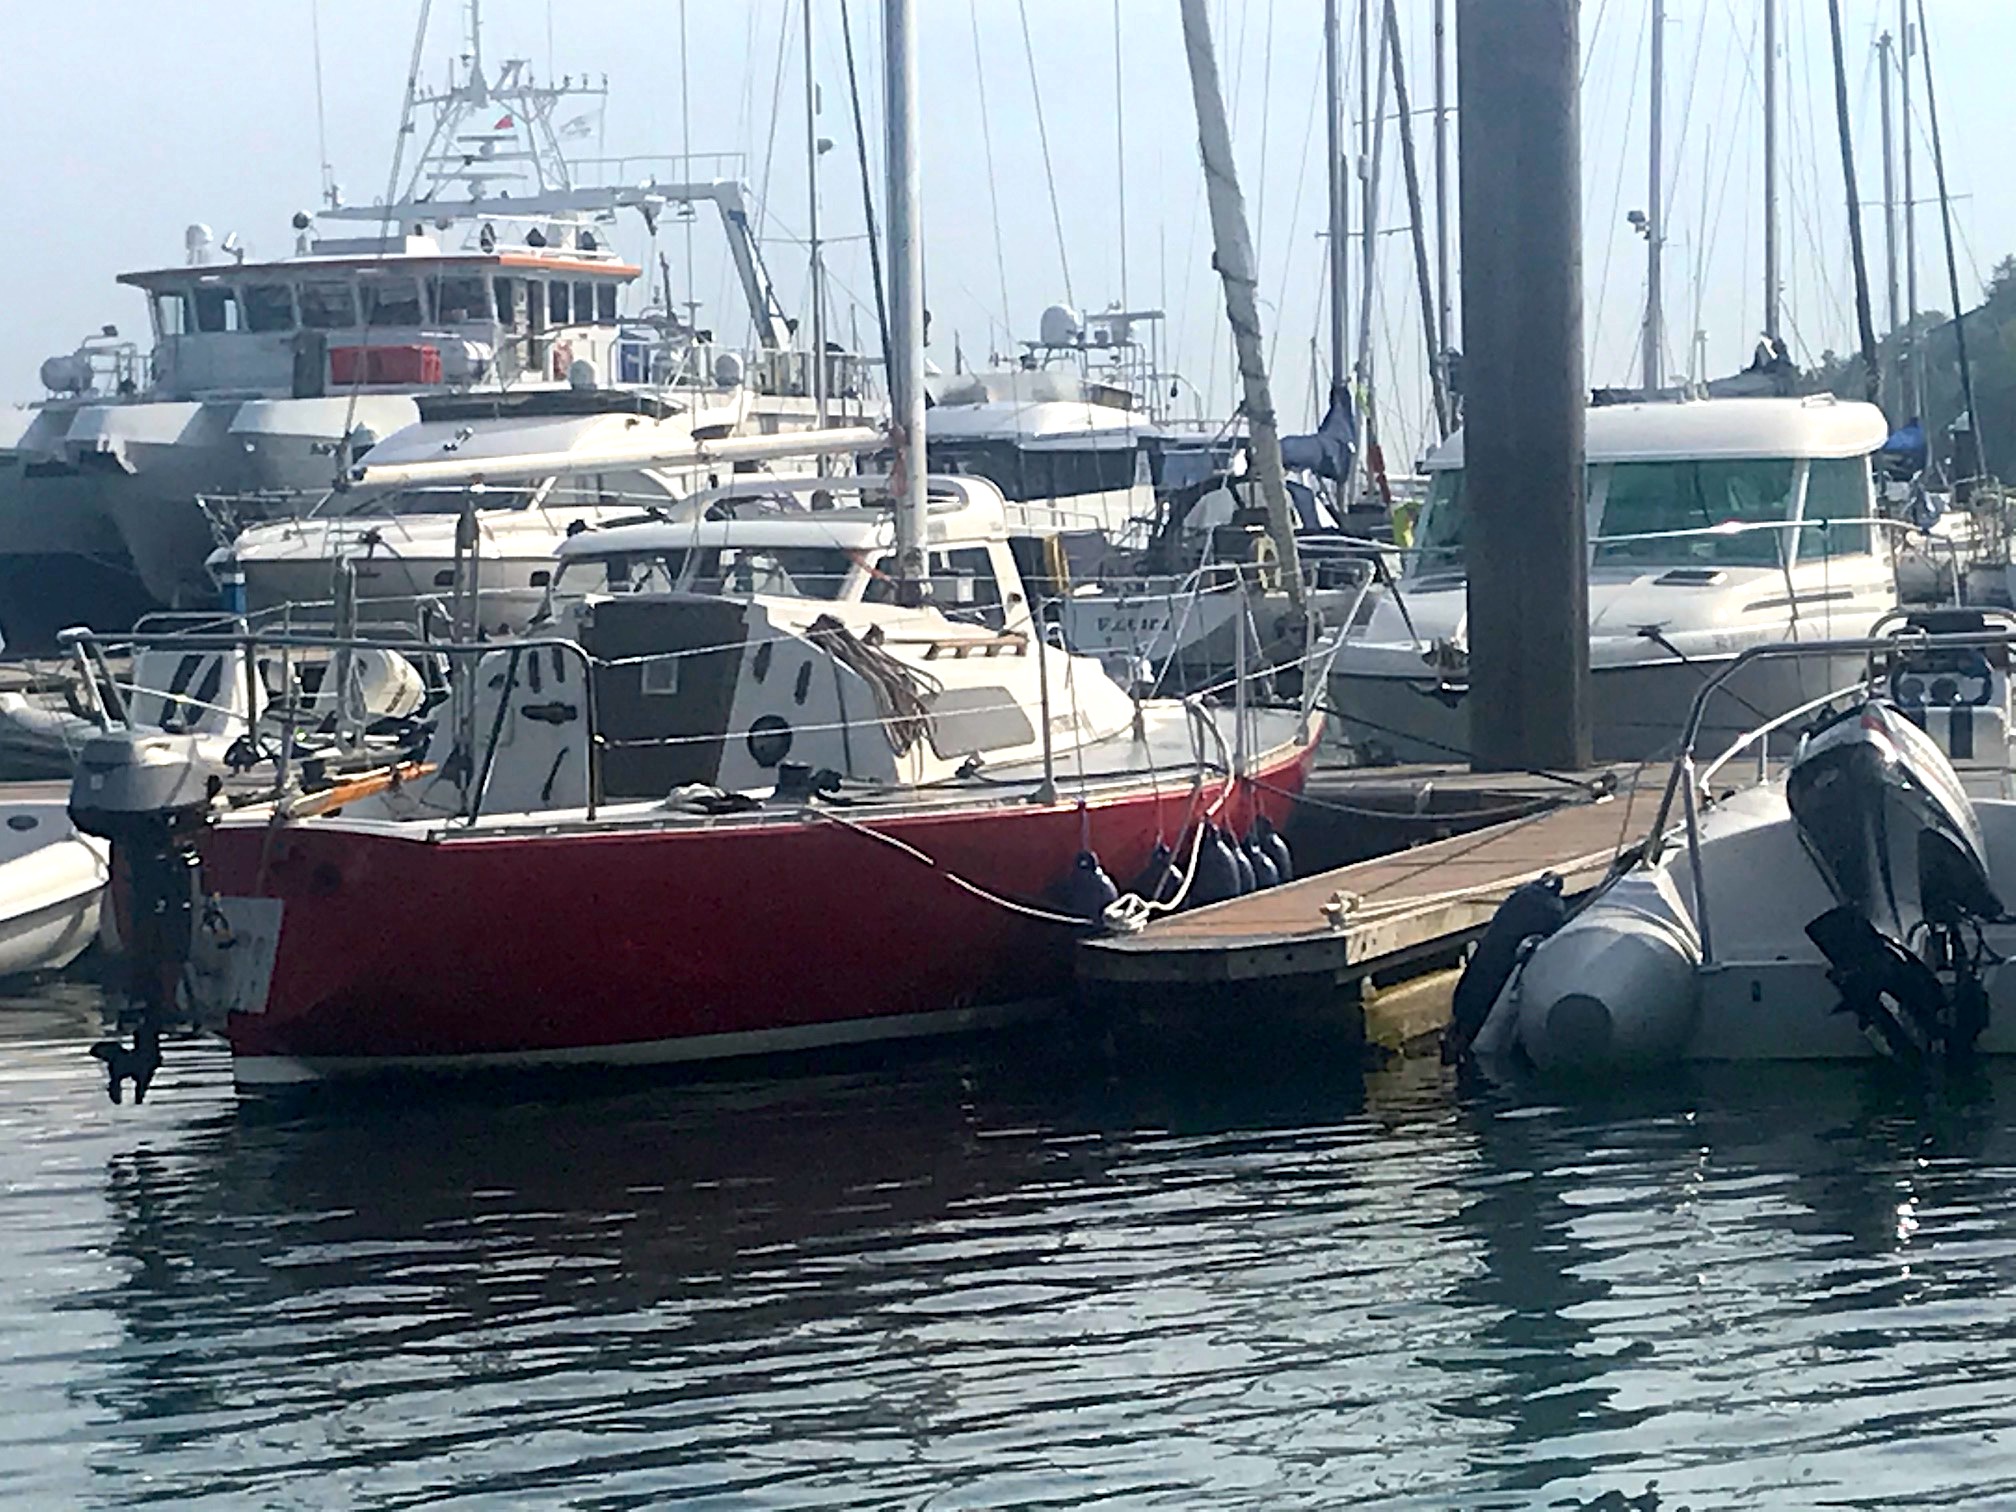 Red hull of Eygthene 24 the iconic Ron Holland Design race boat moored at marina, photo credit Neil Kenefick